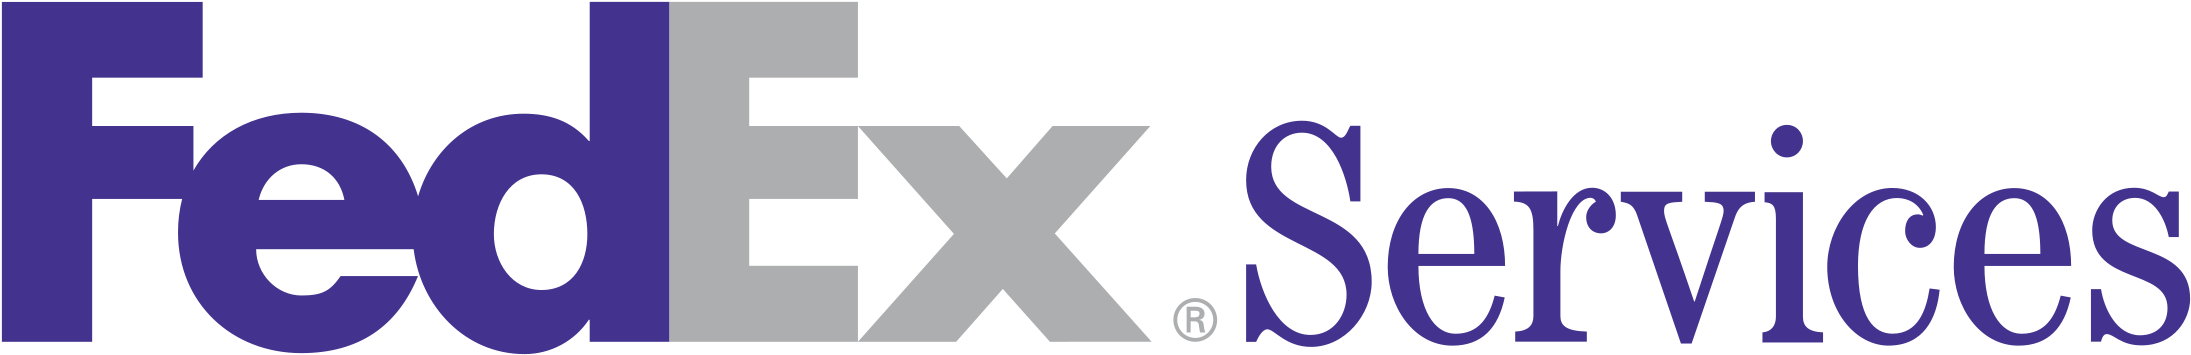 Fed Ex Services Logo PNG